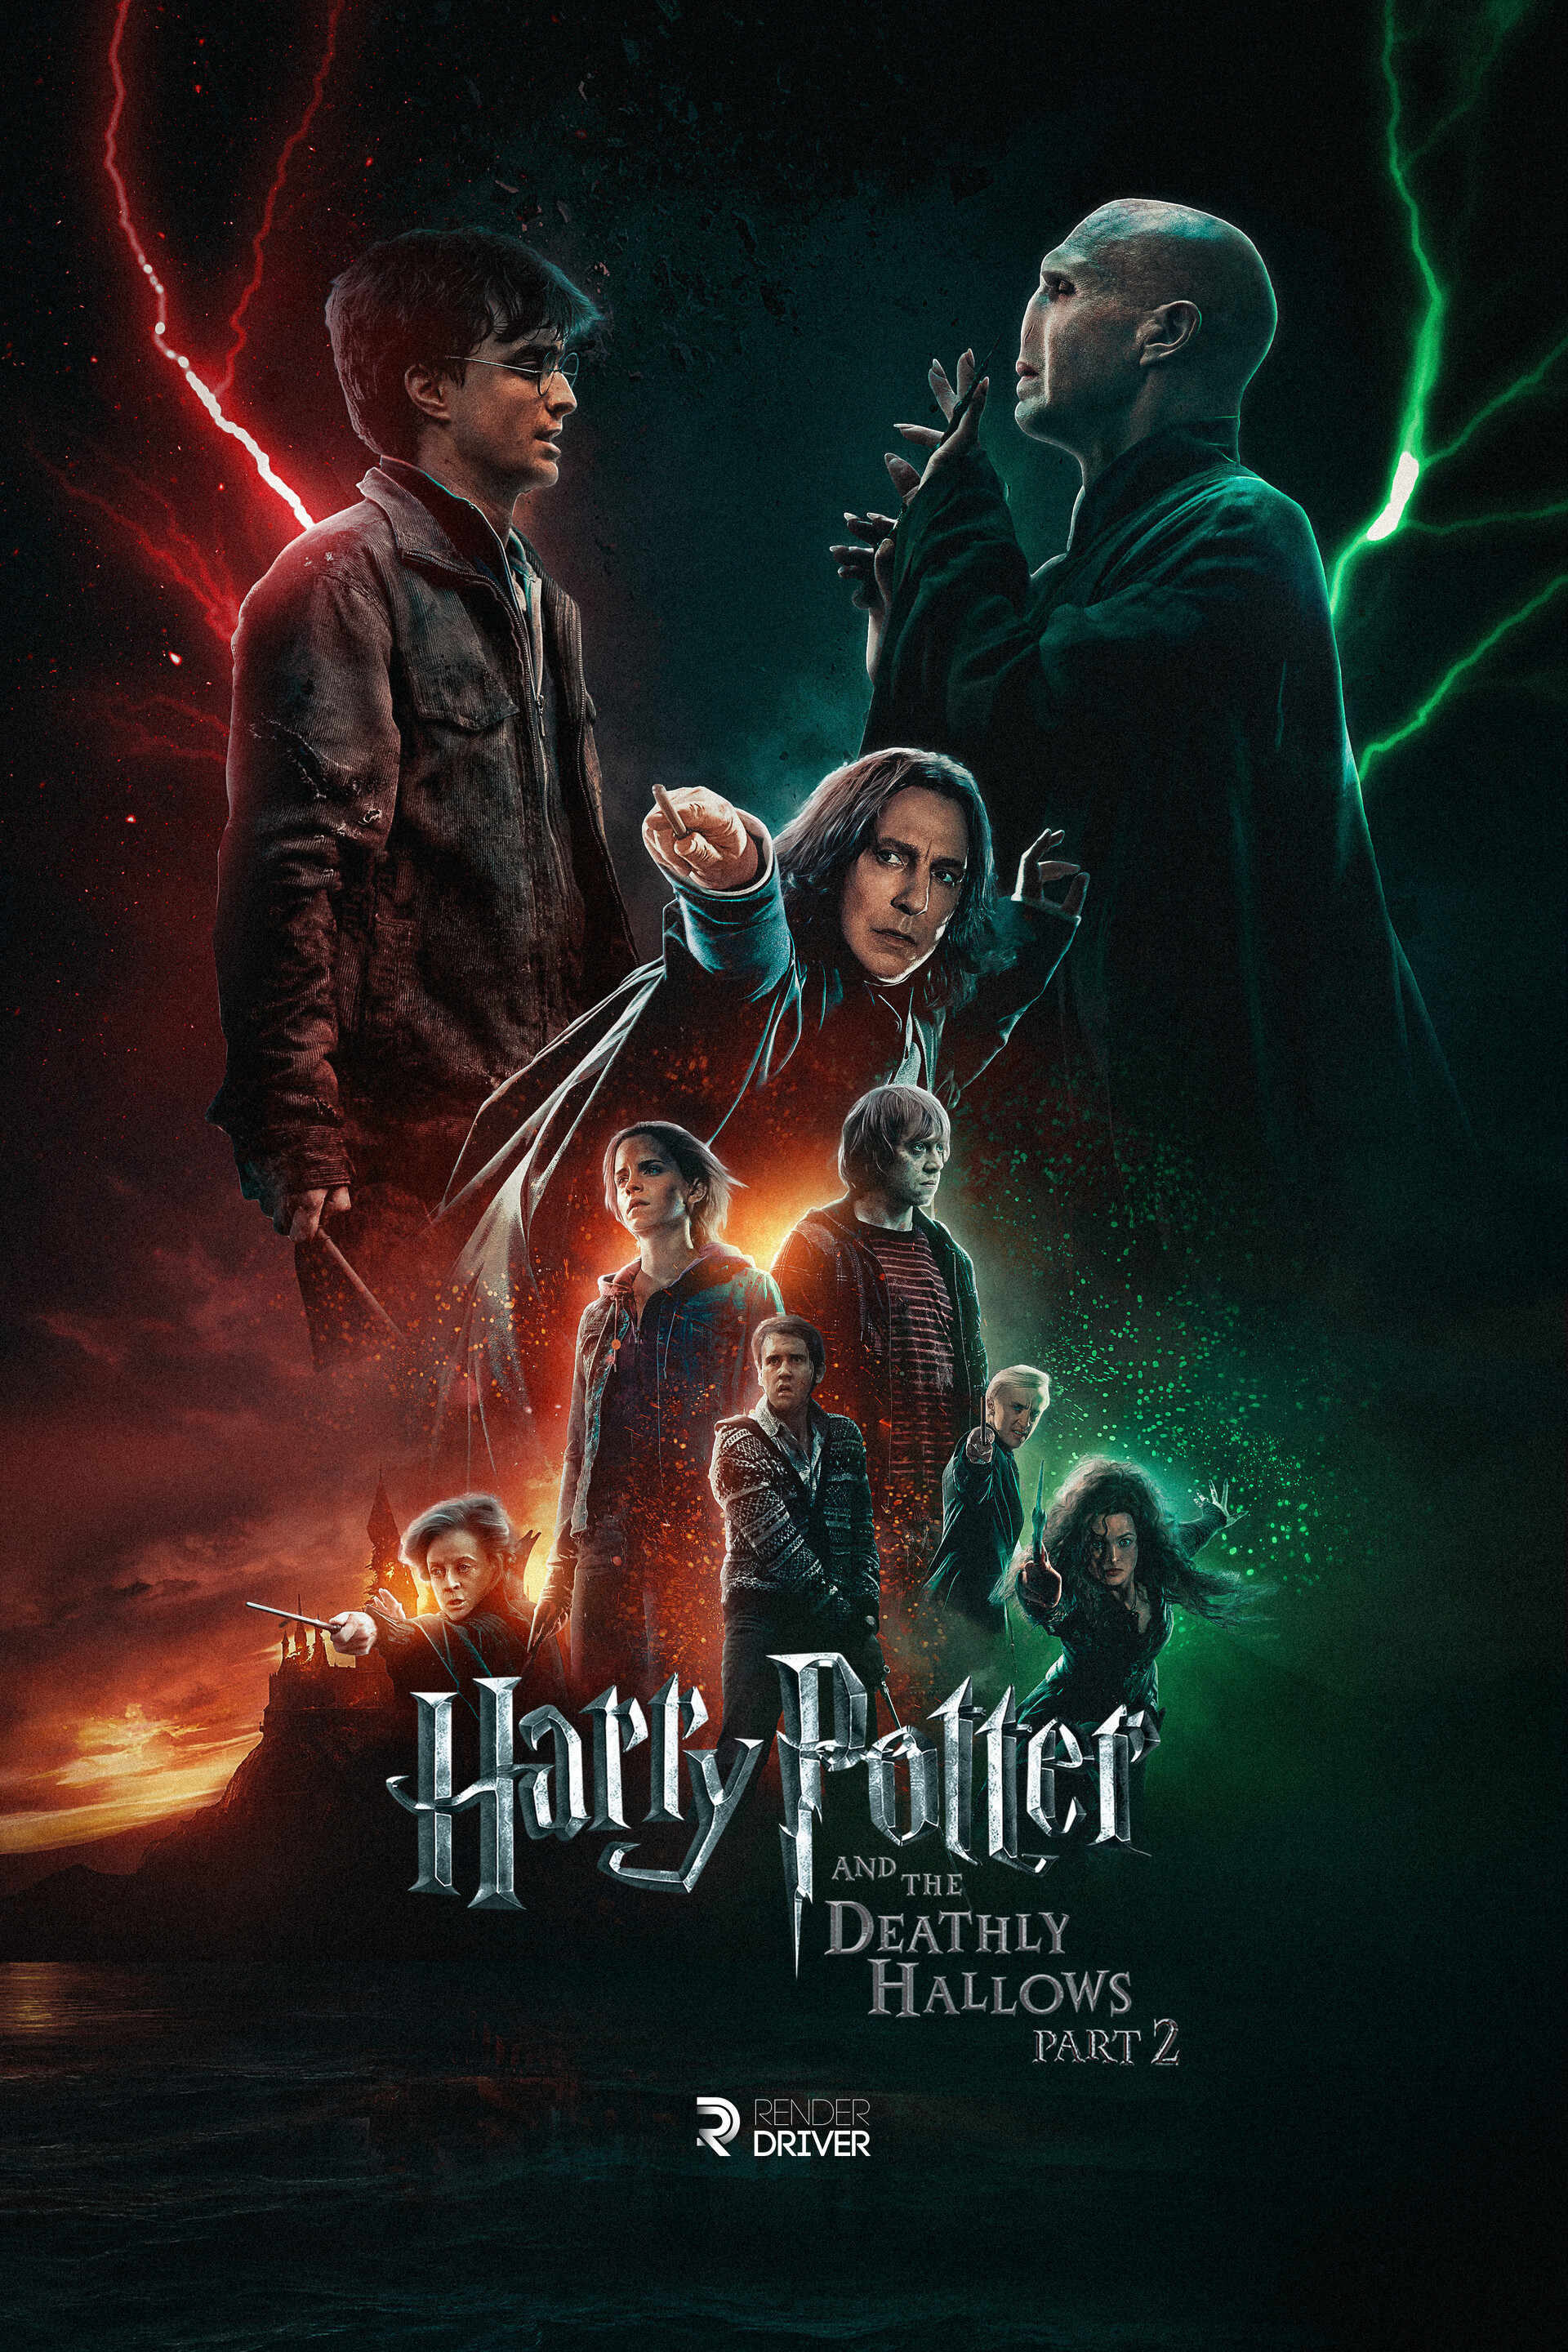 ArtStation - Harry Potter and the Deathly Hallows Part 2 Poster